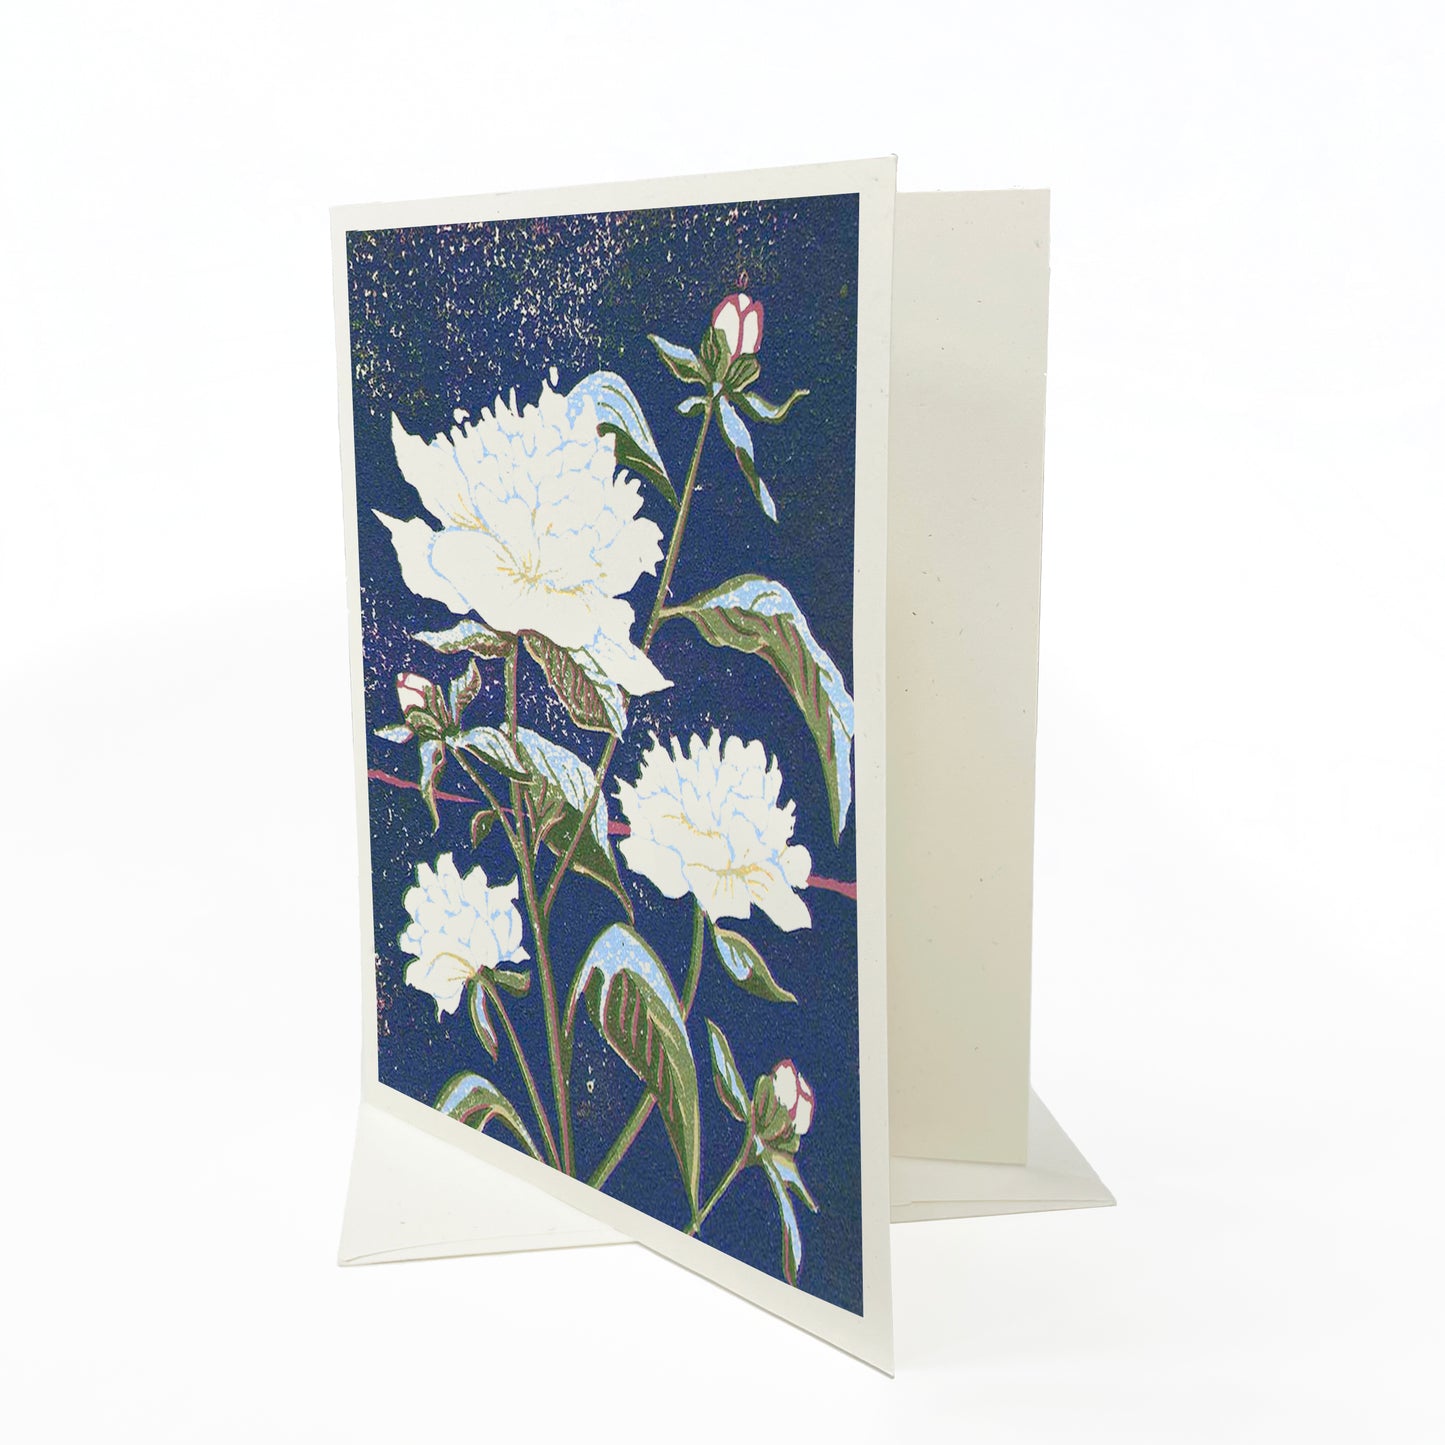 A casually elegant card featuring floral art by Natalia Wohletz titled Peony.